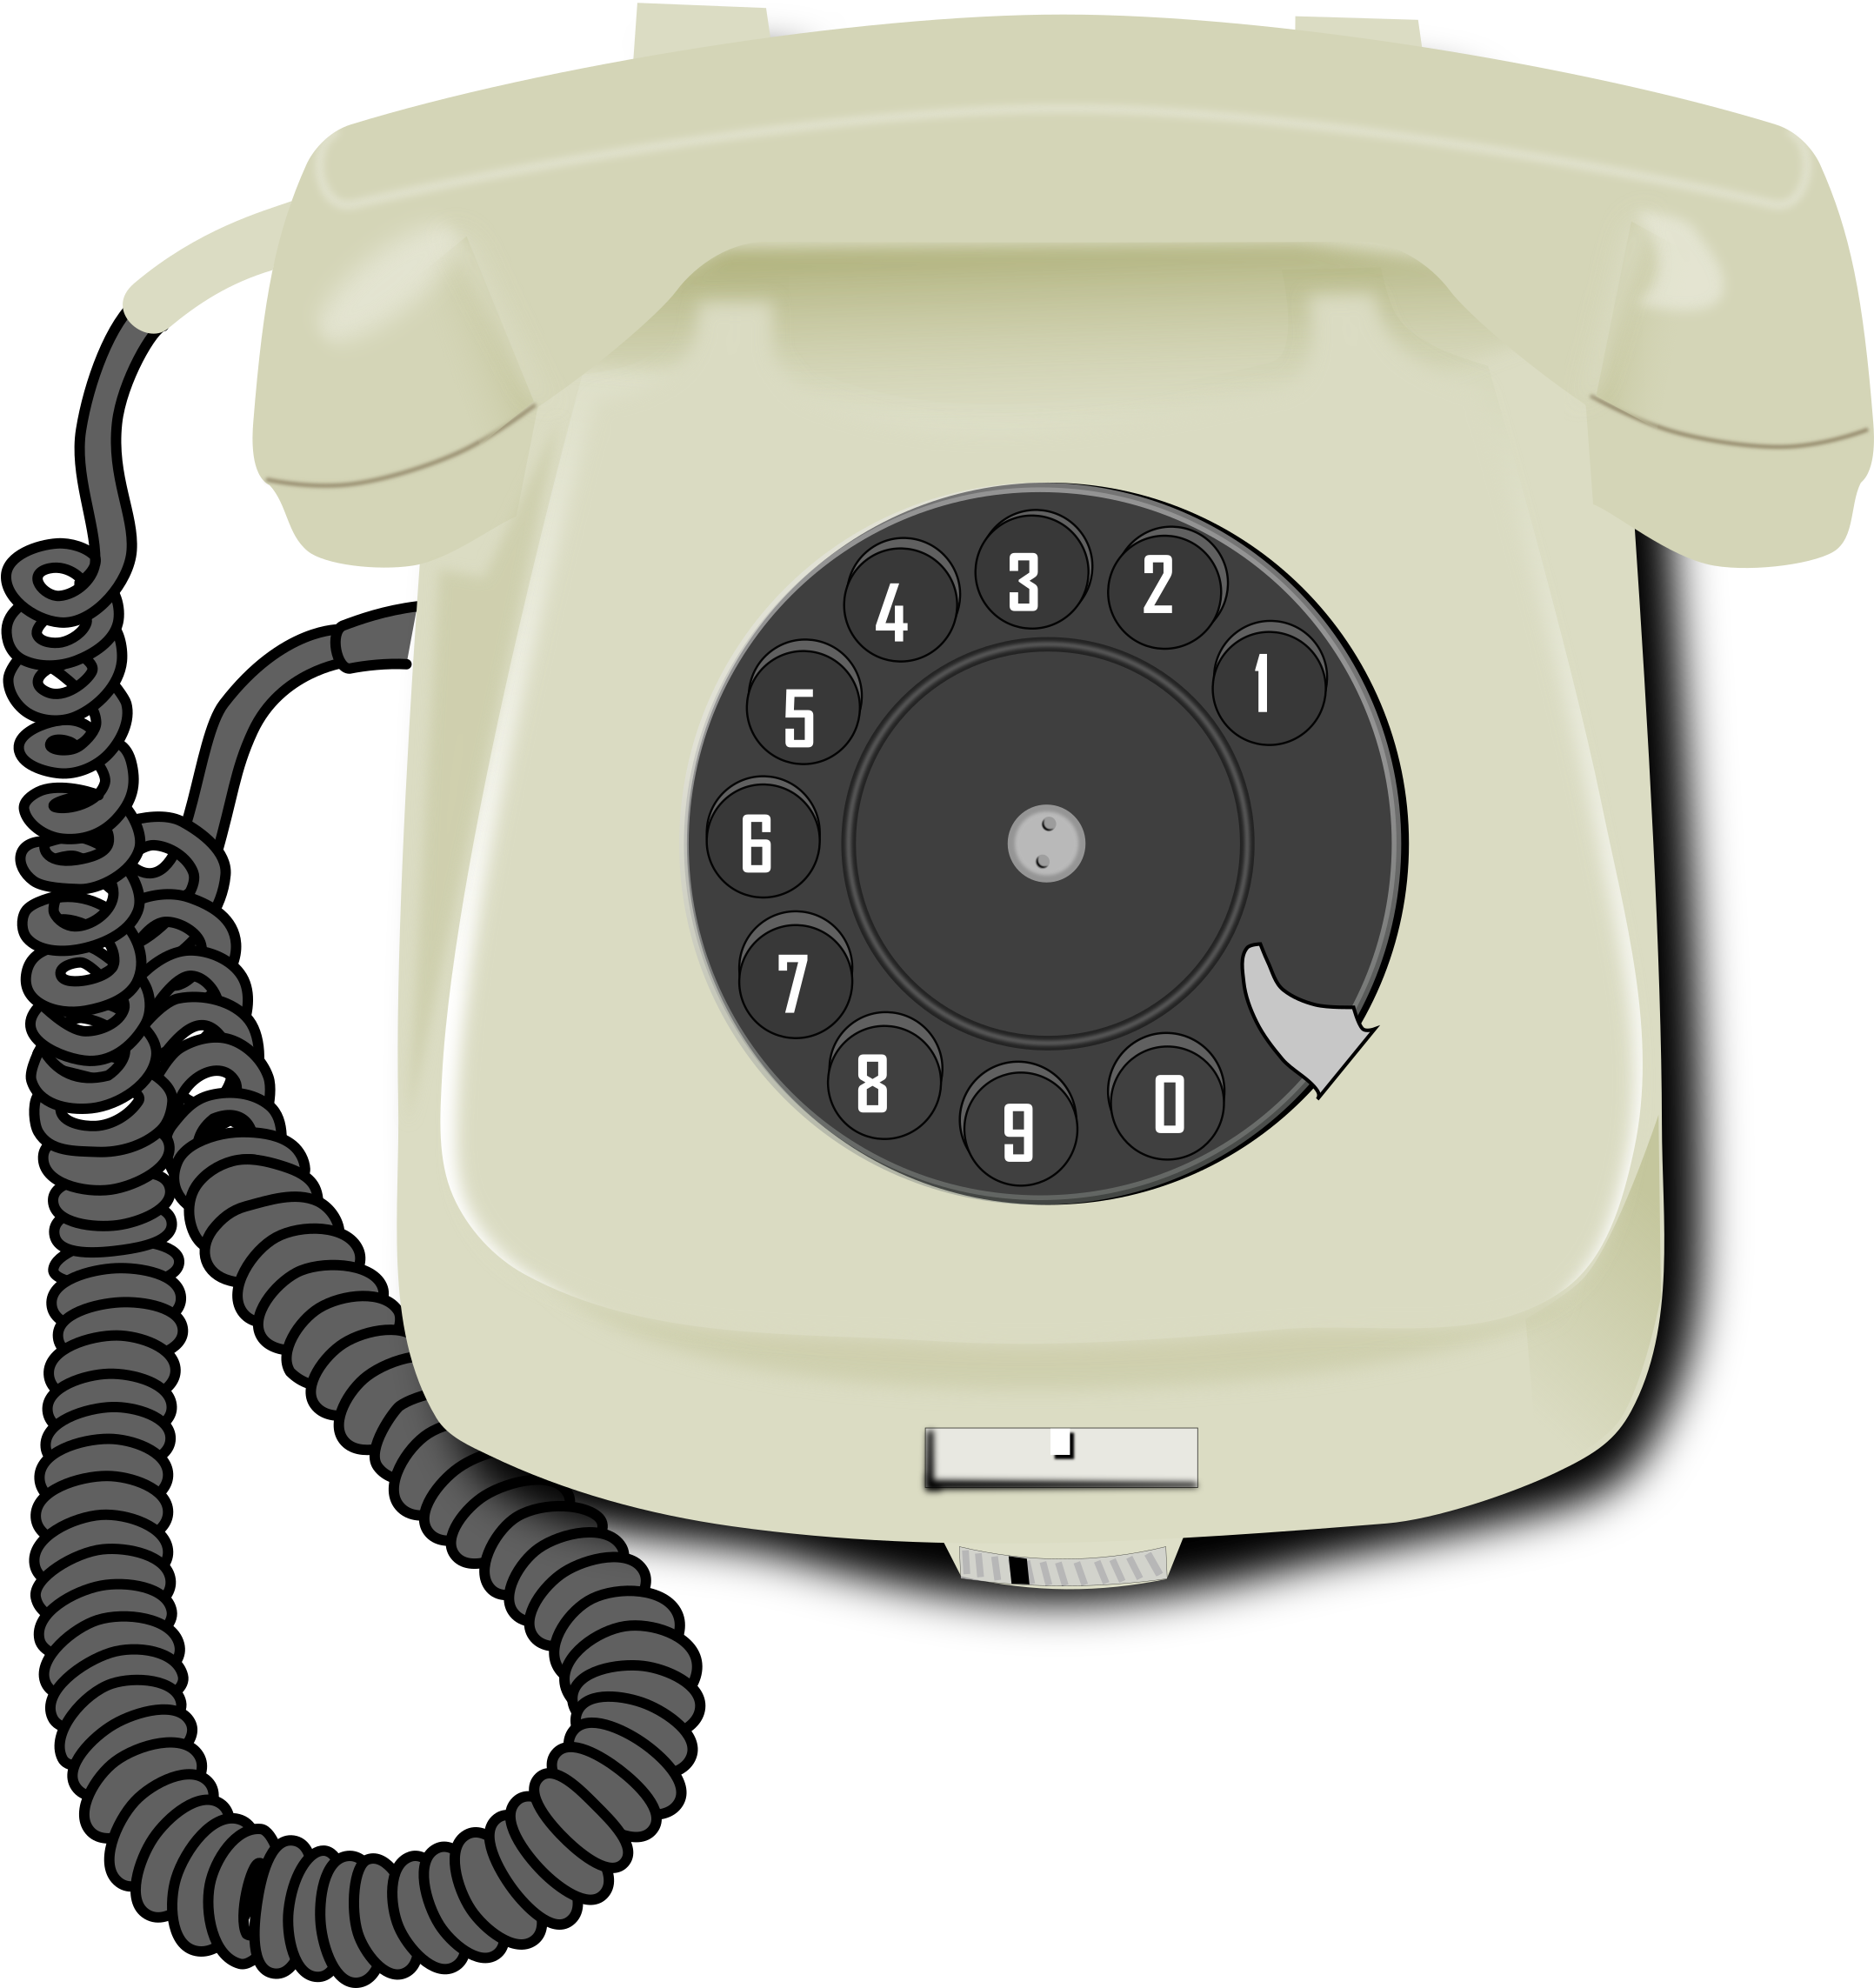 Big Image - Old Dial Telephone Png (2248x2400)